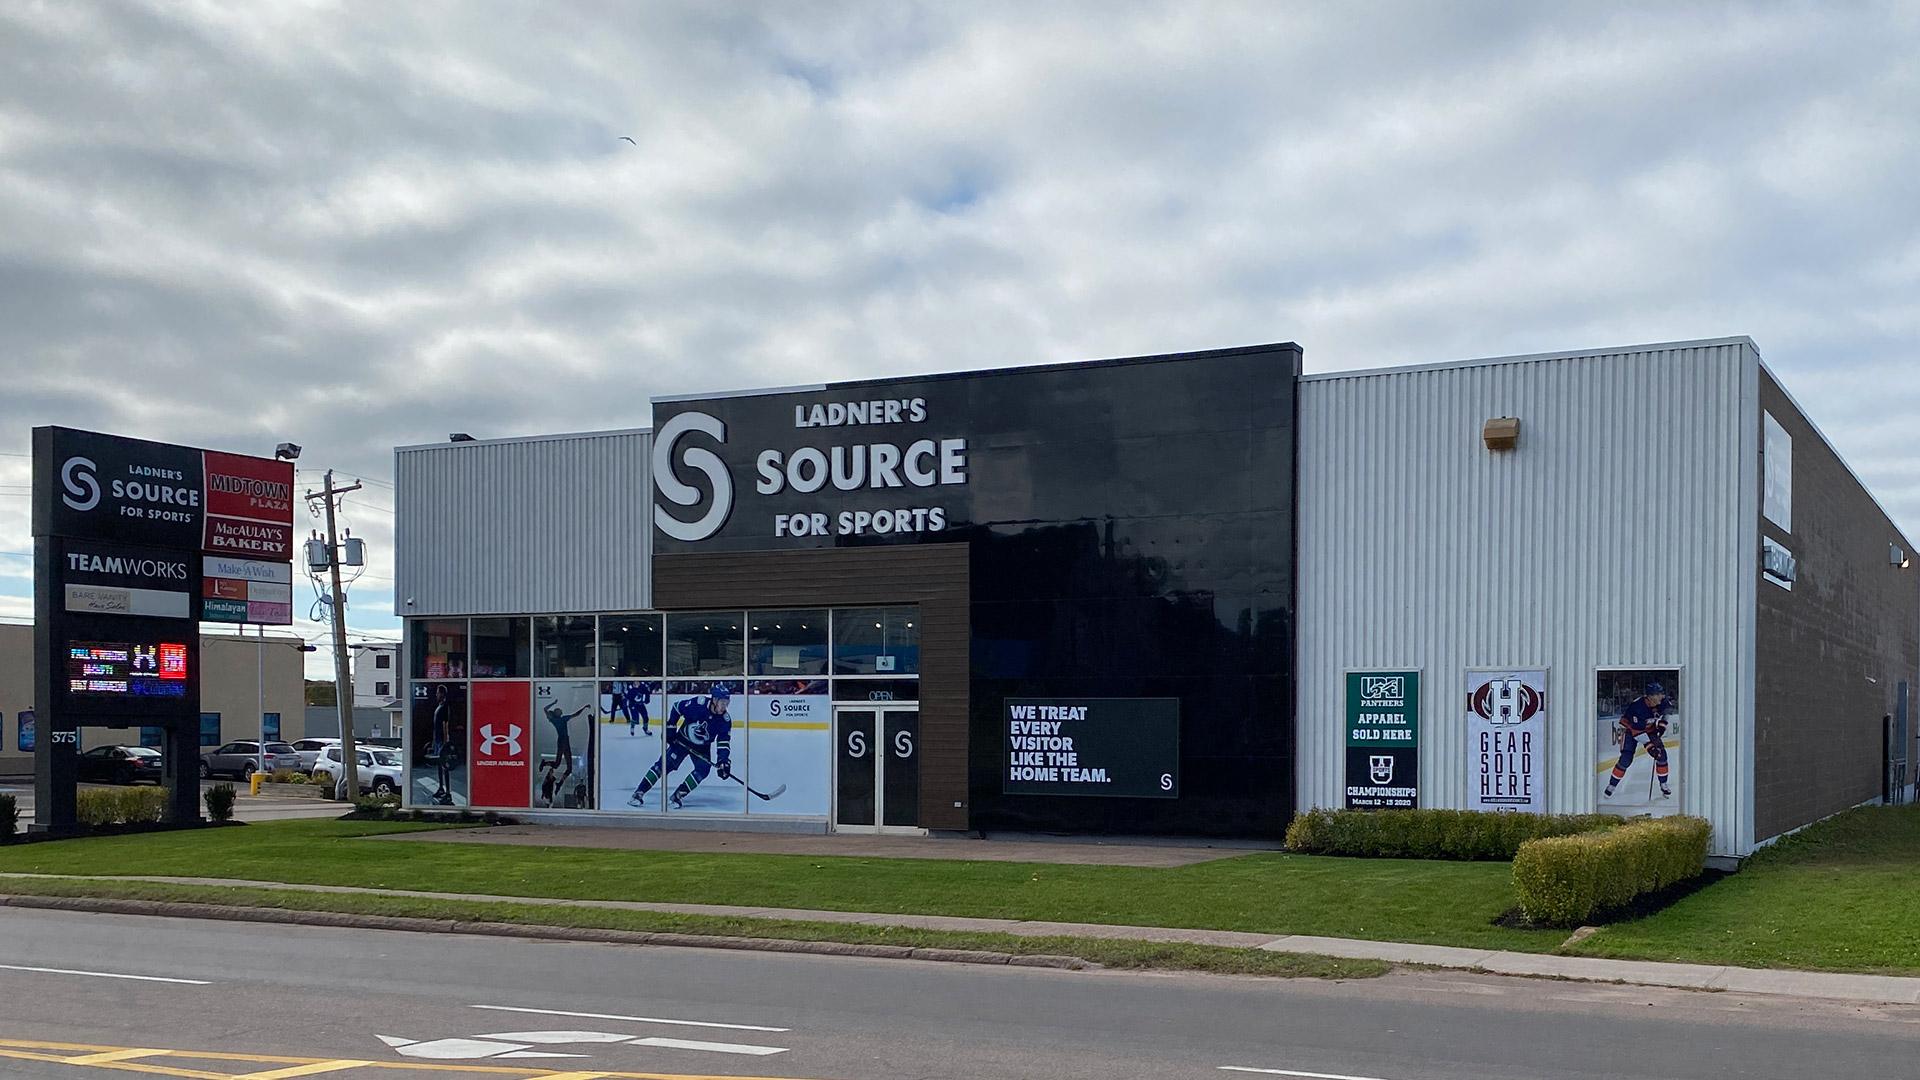 Ladner's Source For Sports